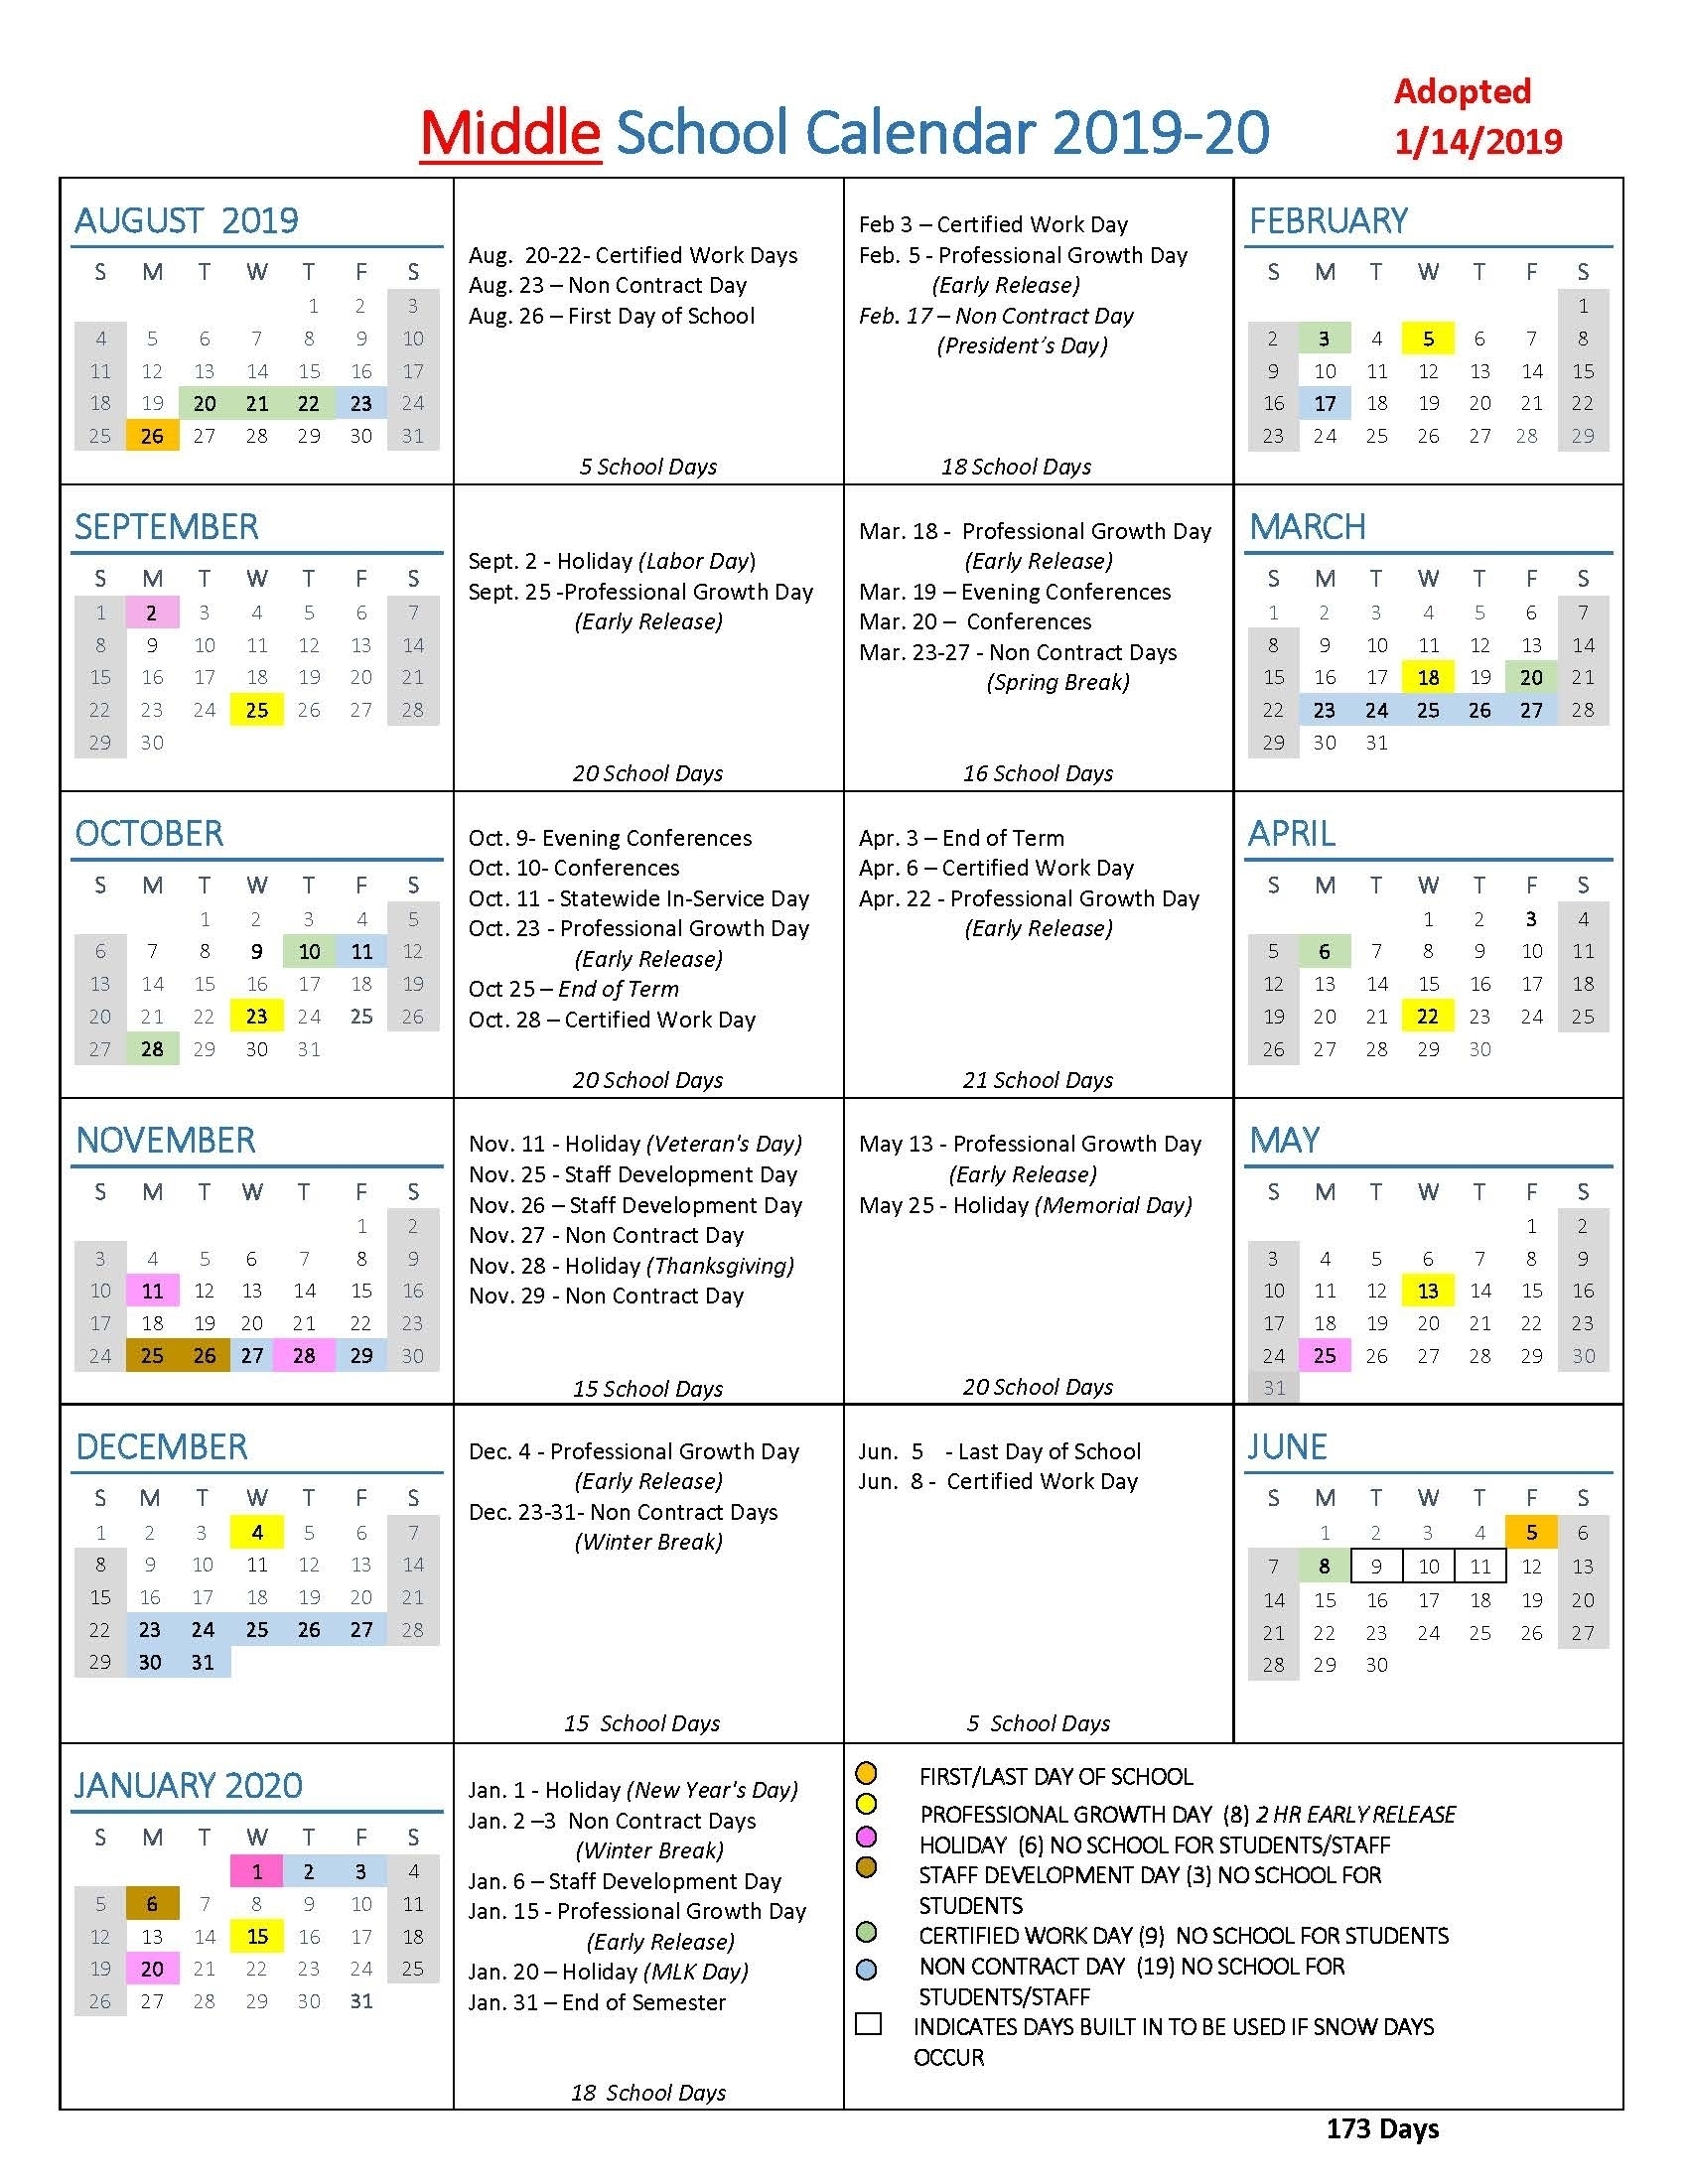 Calendar With All The Special Days In 2020 - Calendar within What Are Special Days In 2020